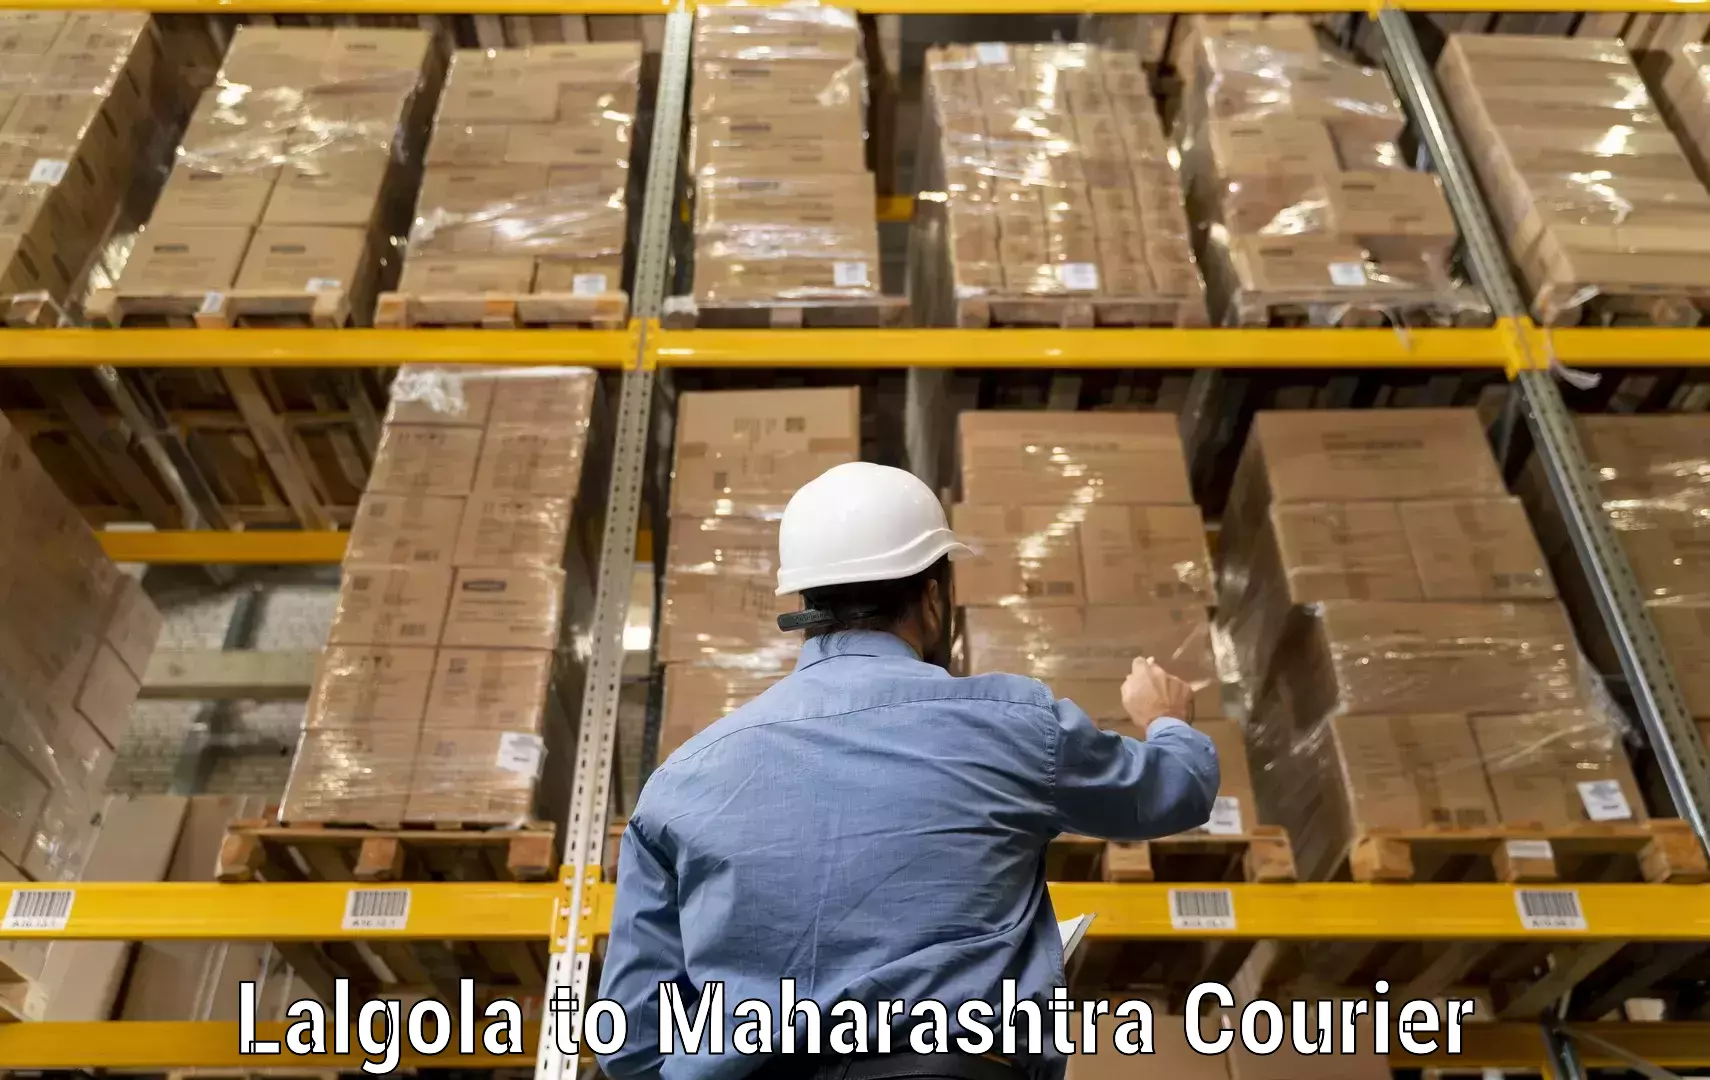 User-friendly courier app Lalgola to Mumbai Port